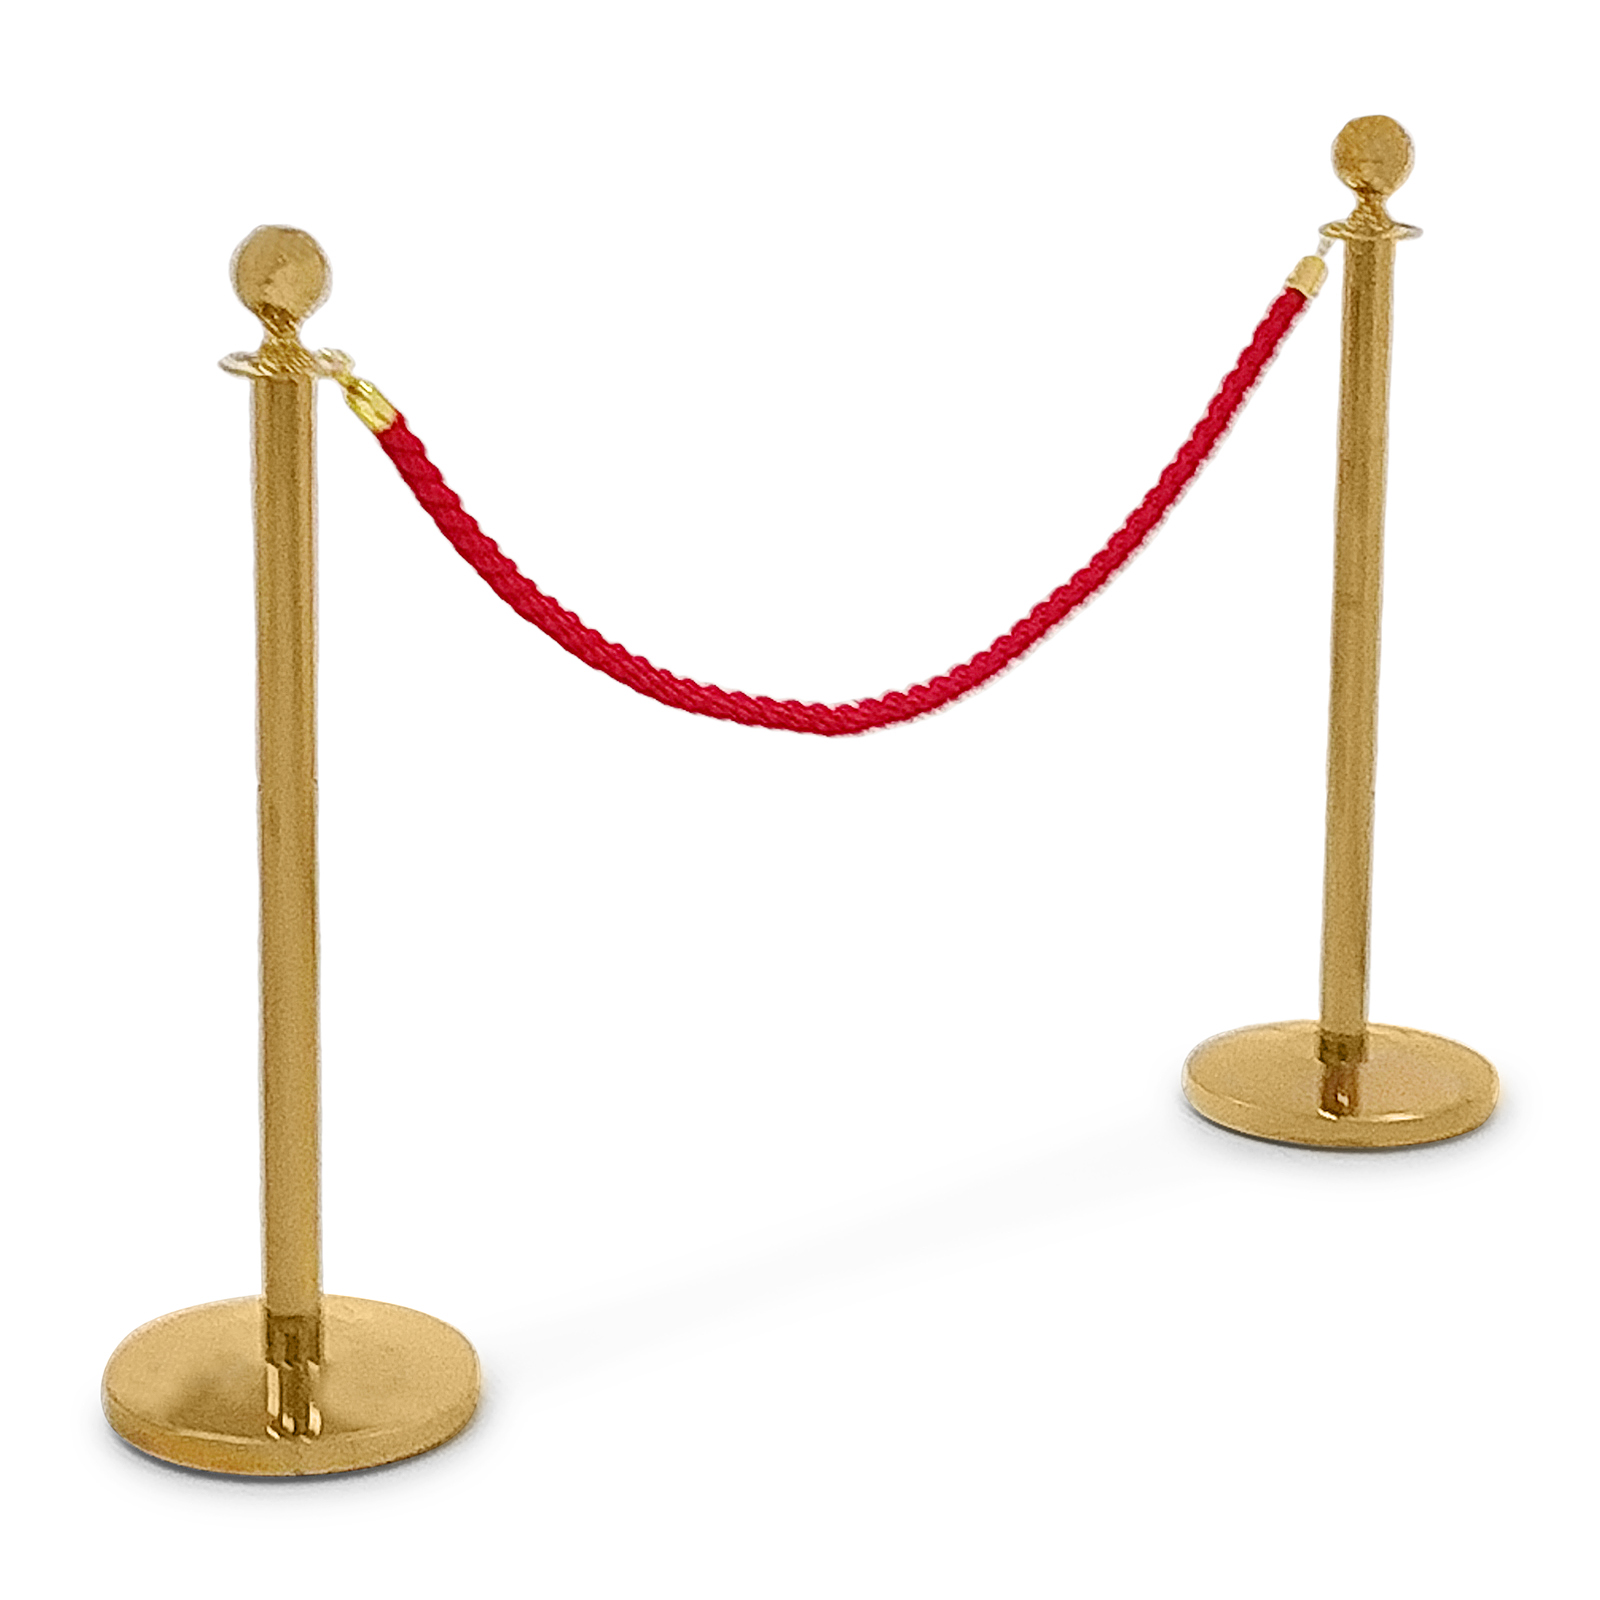 2 Barrier Posts - with barrier rope - 150 cm - titanium coloured